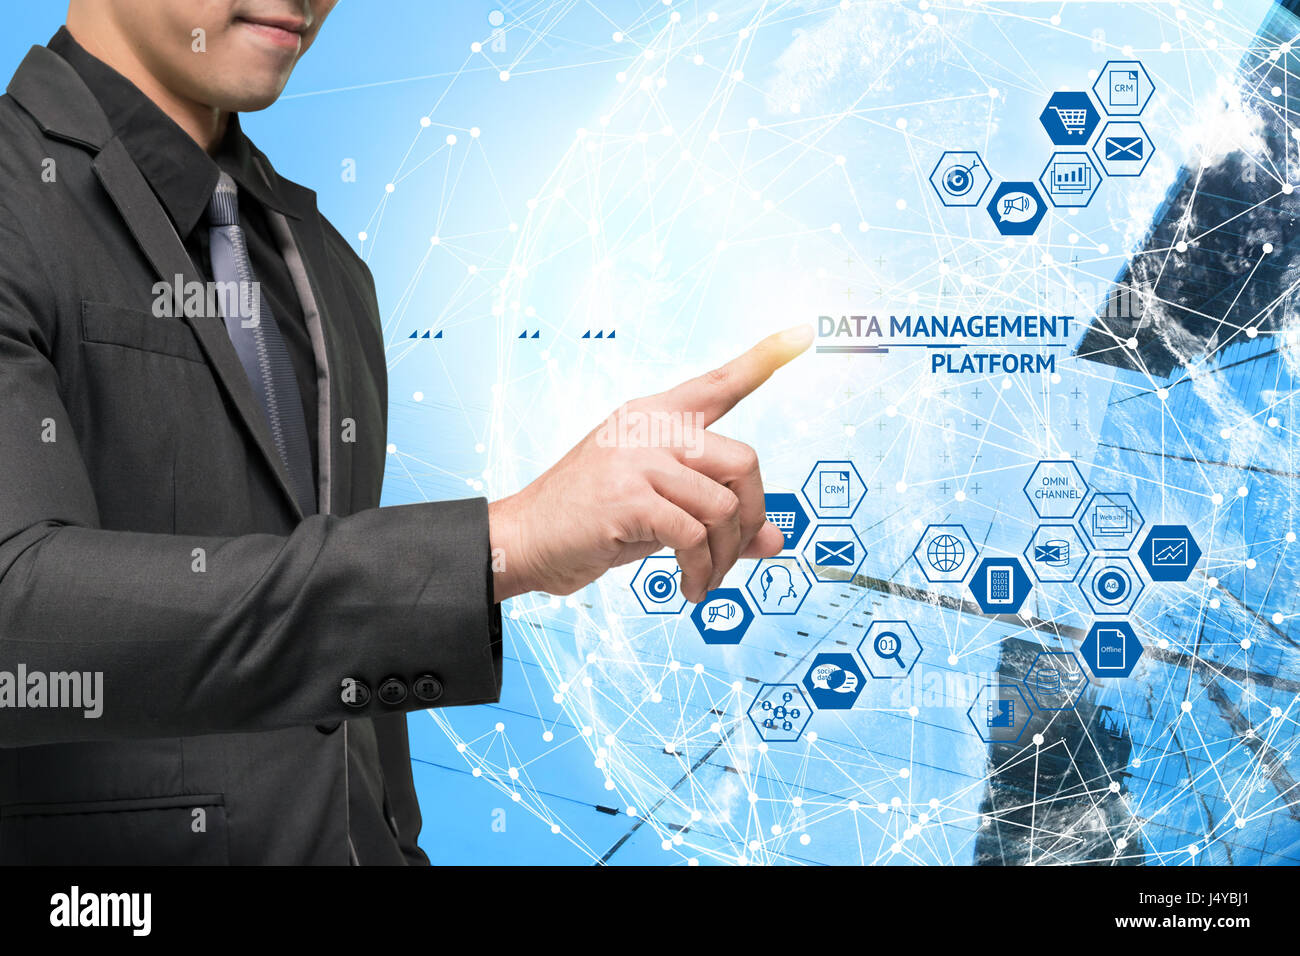 Data Management Platform (DMP) concept. Business man suit point finger to Infographic of texts and omni channel technology icons with globe connect an Stock Photo